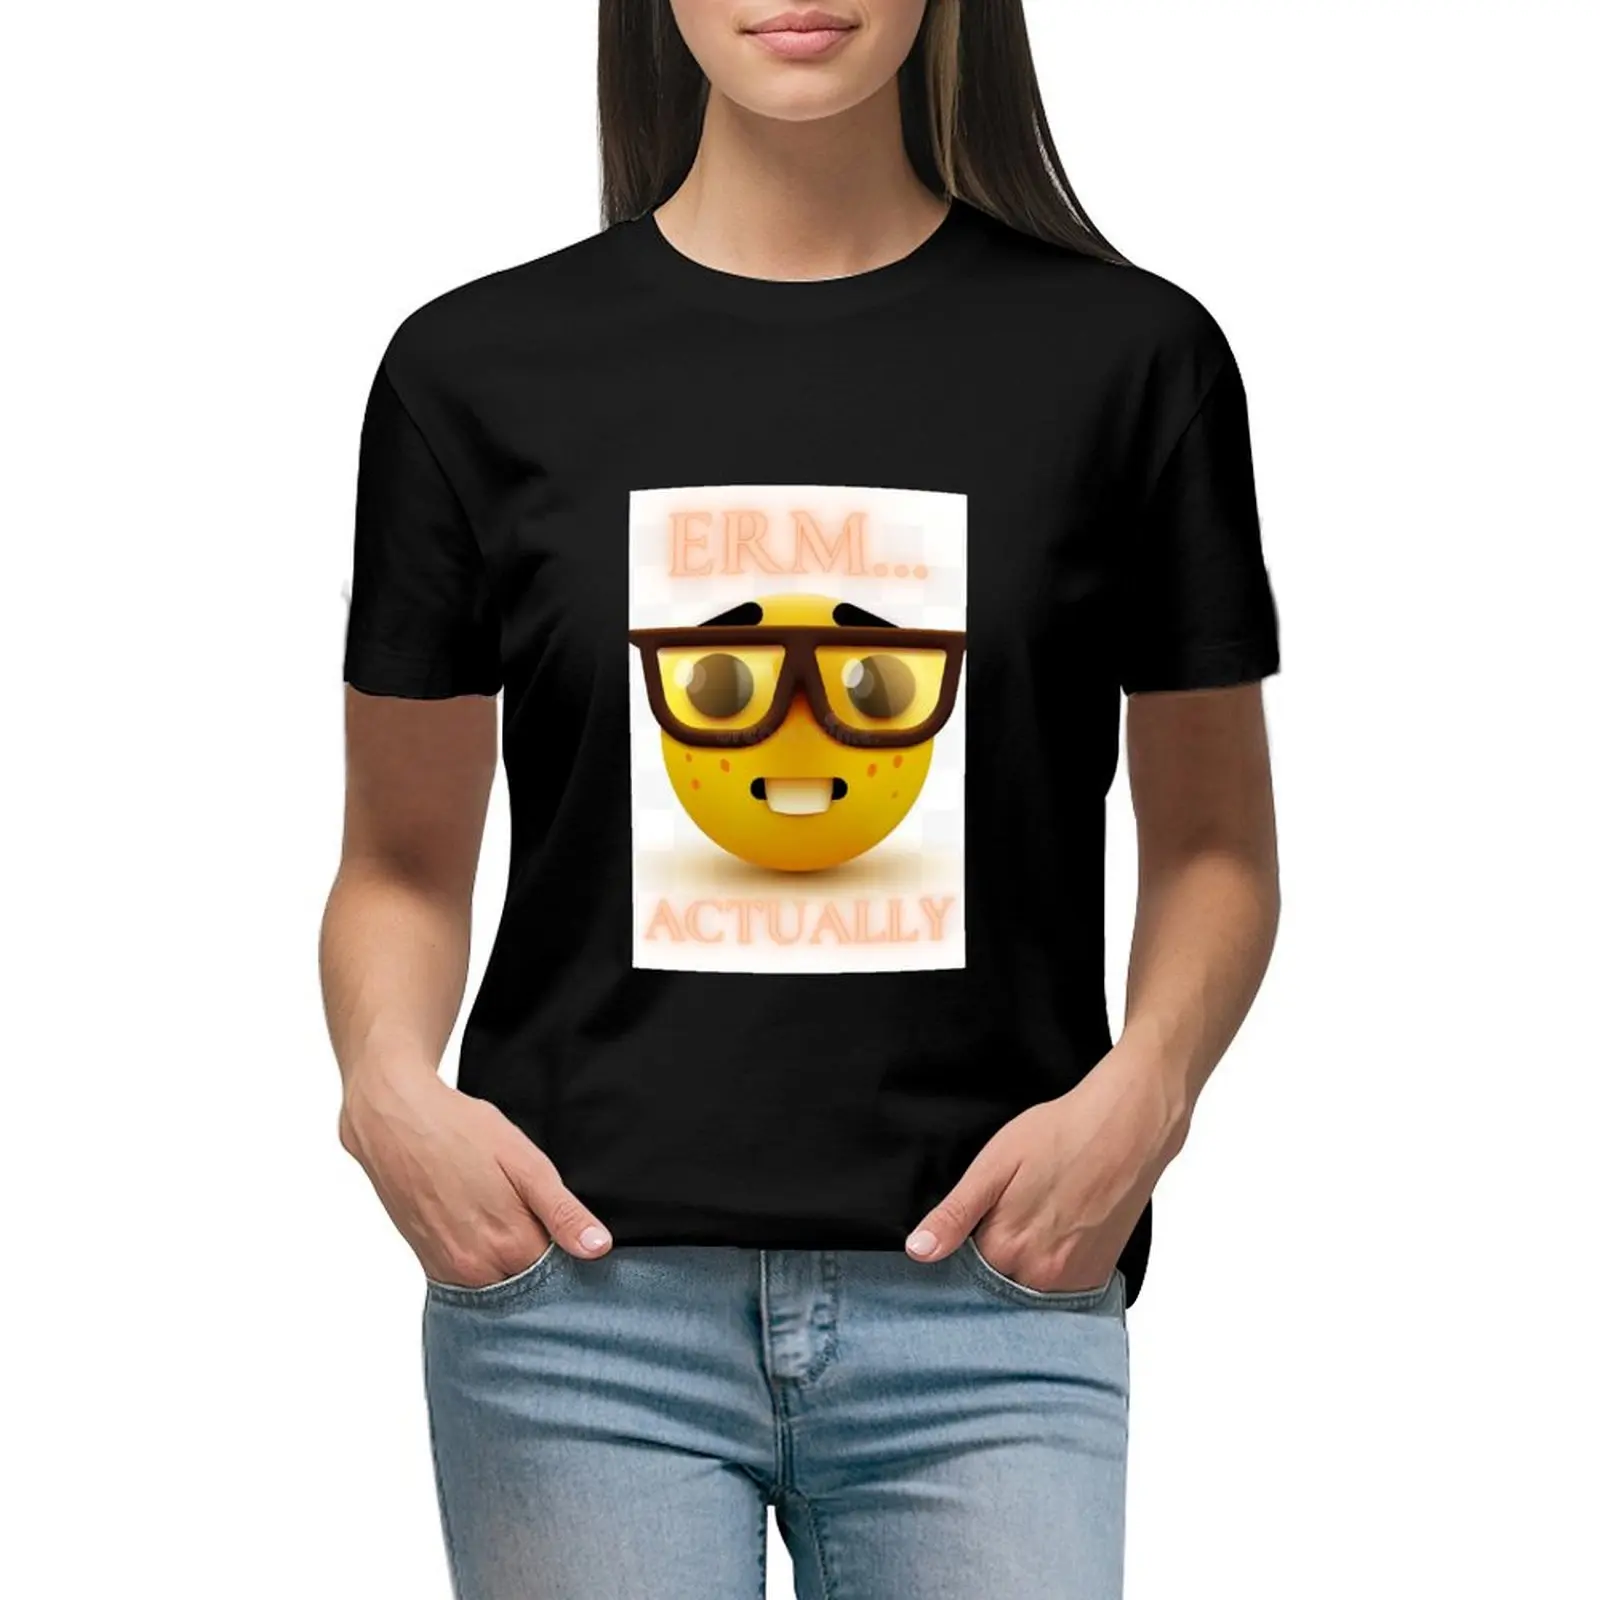 

ERM ACTUALLY MEME T-shirt summer clothes Aesthetic clothing Woman clothing